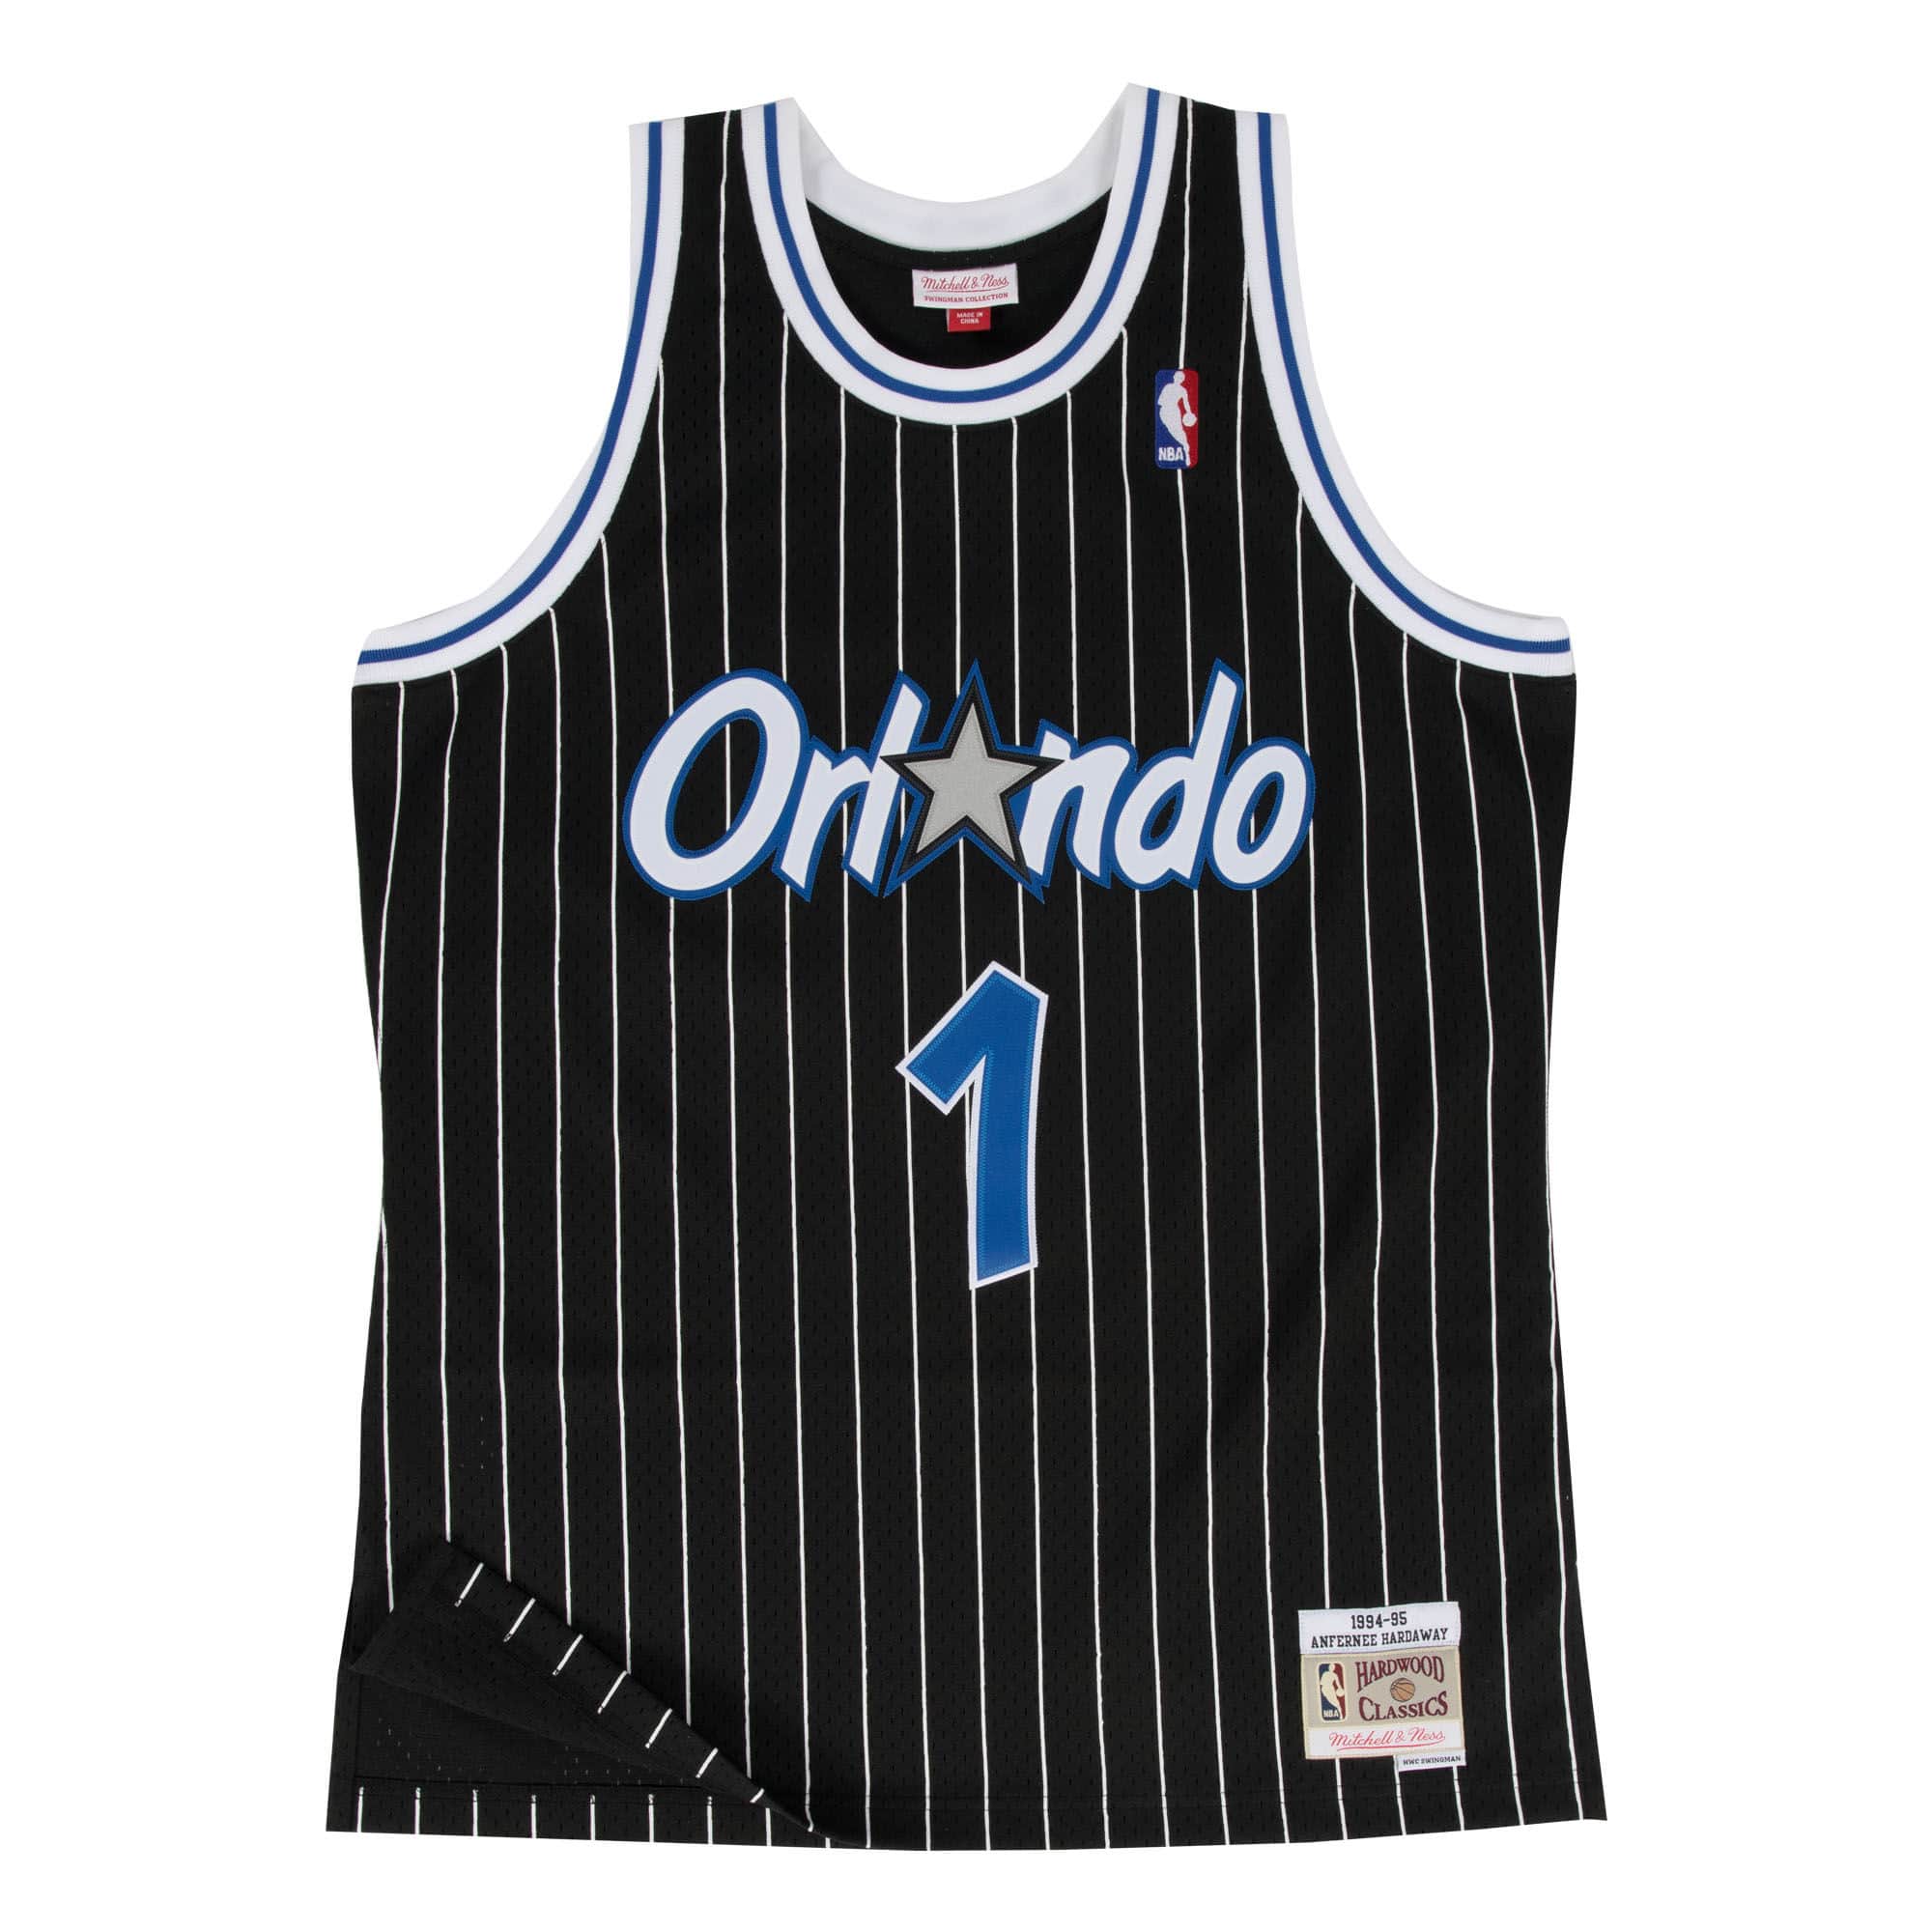 Minnesota Timberwolves Mitchell and Ness 1994 All Star Weekend